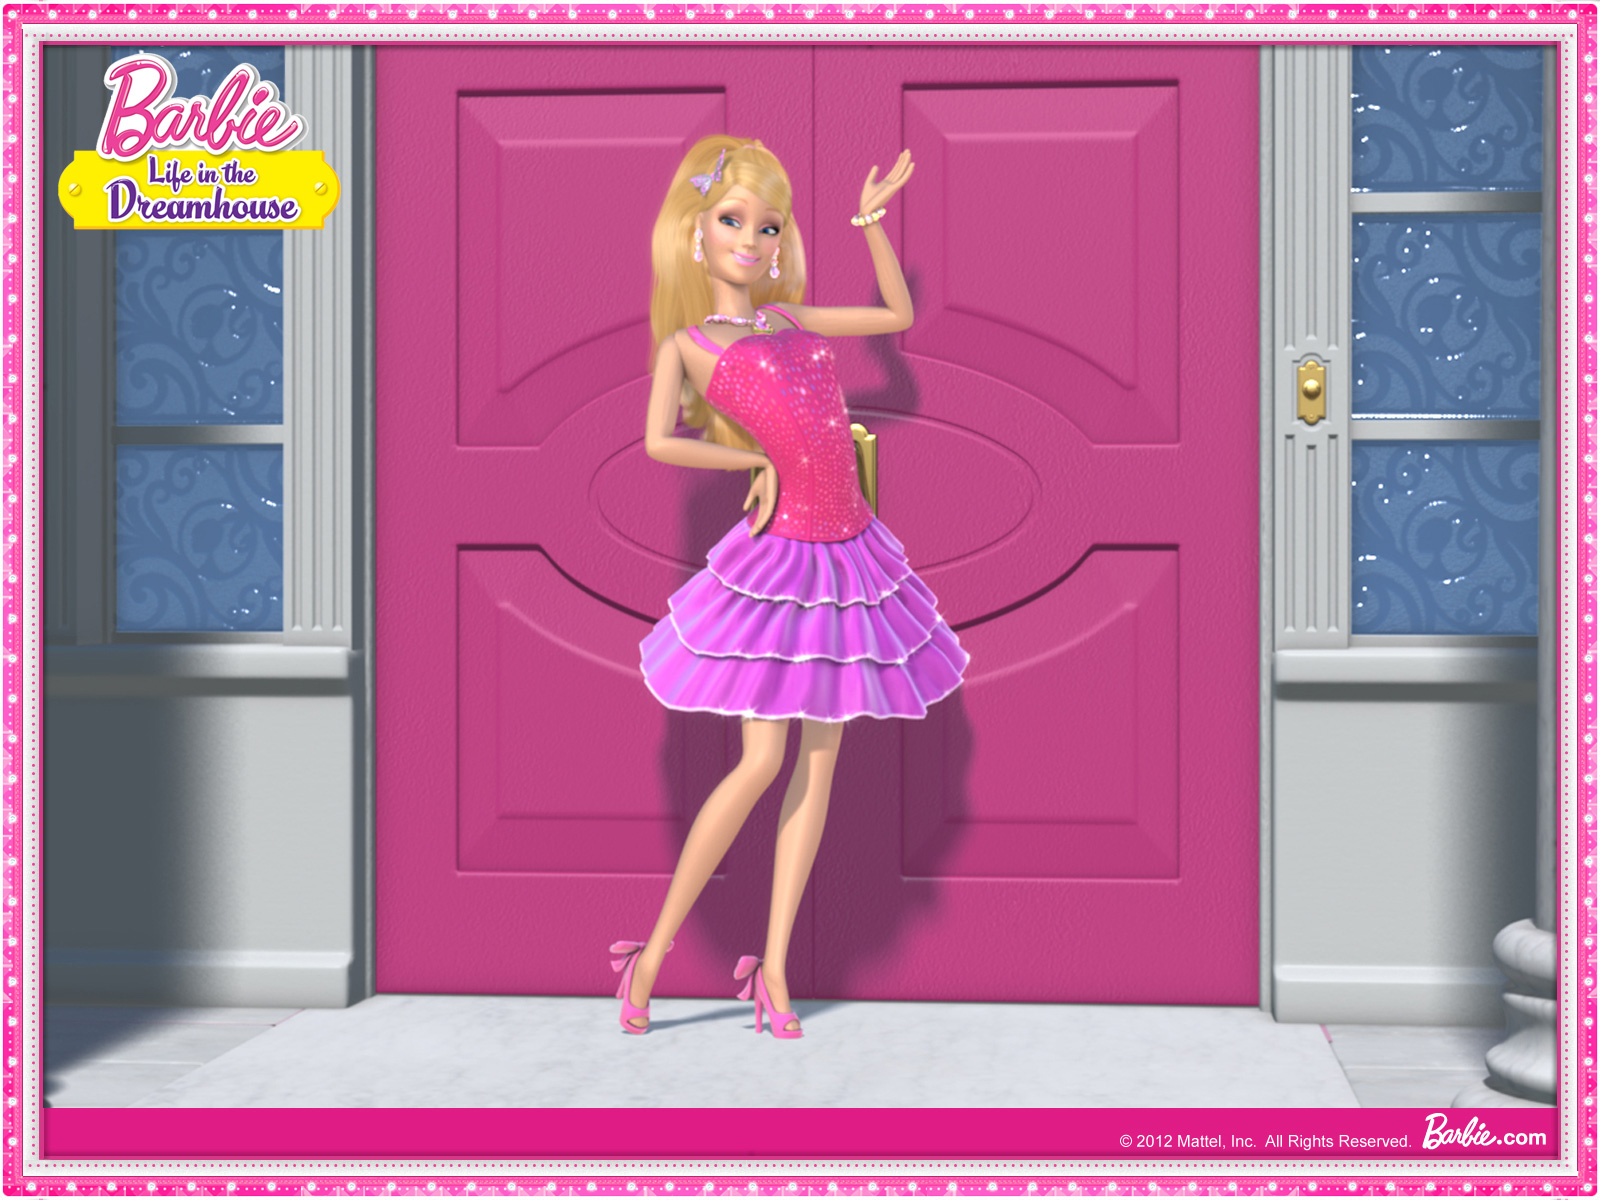 Barbie Life in The Dreamhouse Wallpaper HD